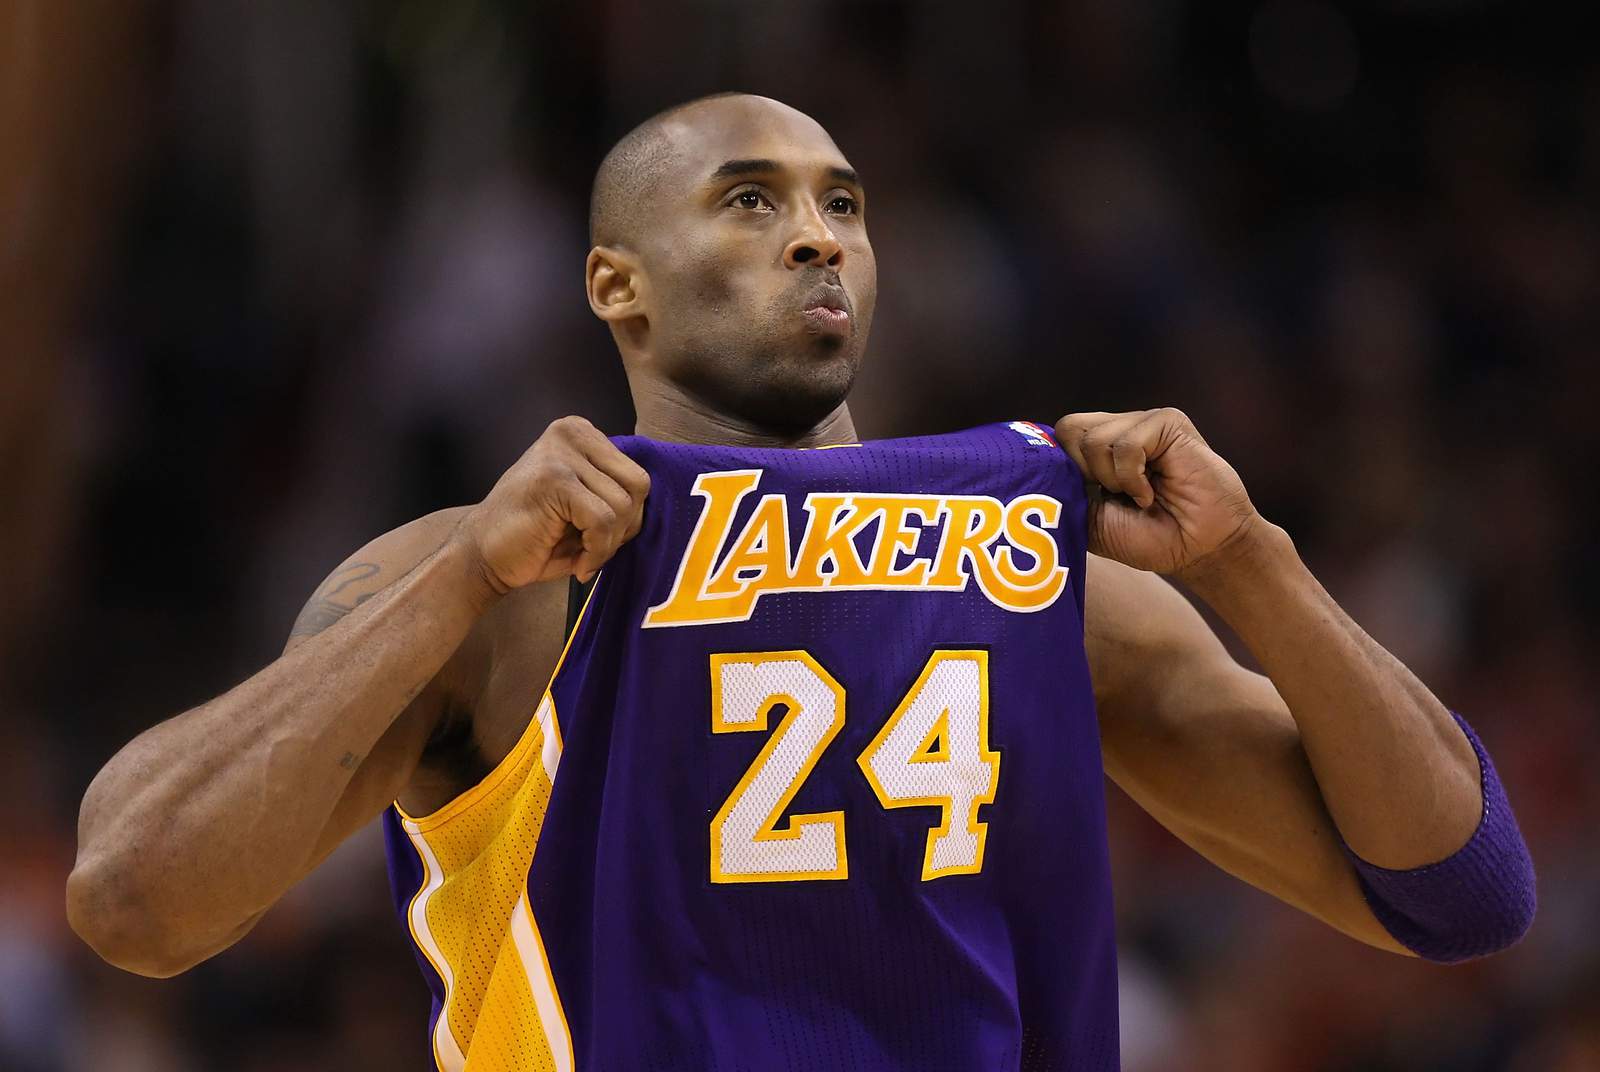 Kobe Bryant adjusts his jersey during a game vs. the Phoenix Suns at the U.S. Airways Center on Feb. 19, 2012.